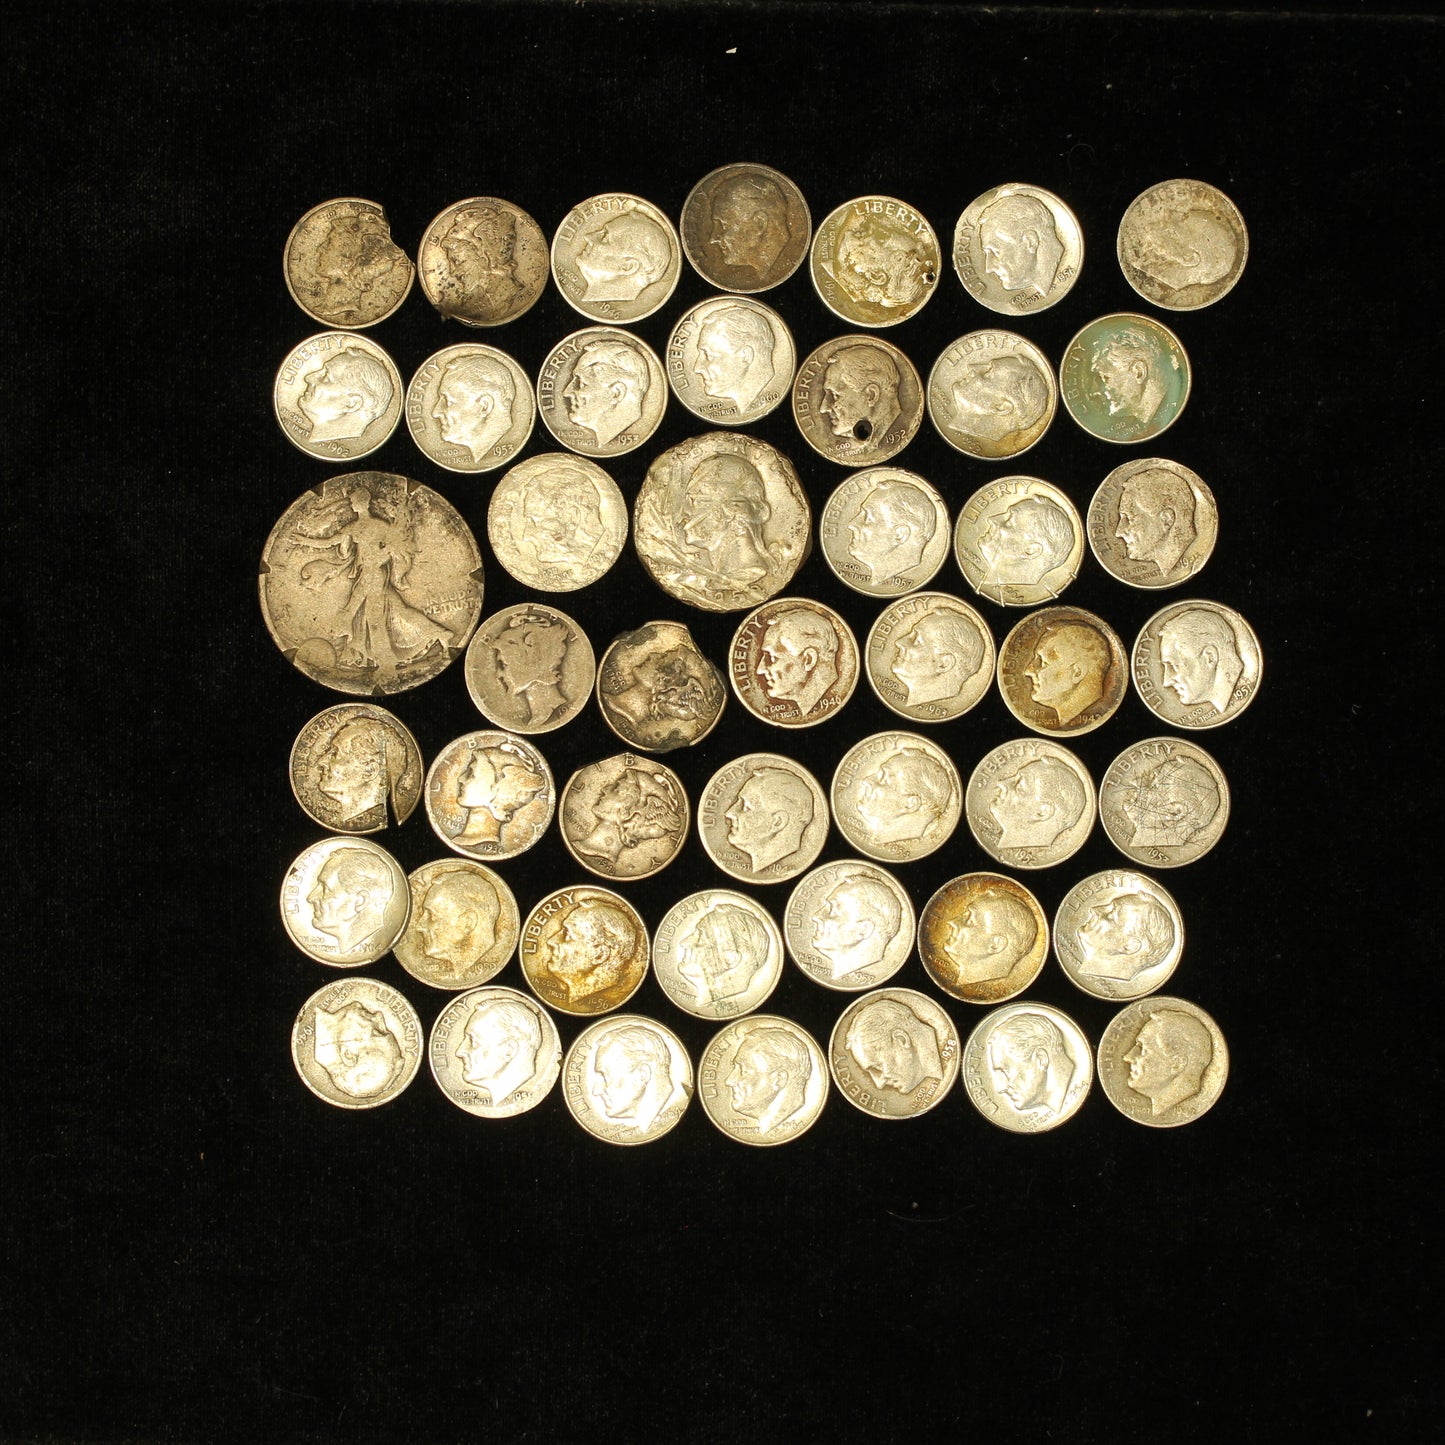 90% US Silver Coin Lot - Damaged / Worn / Cull Coins 127.9 grams